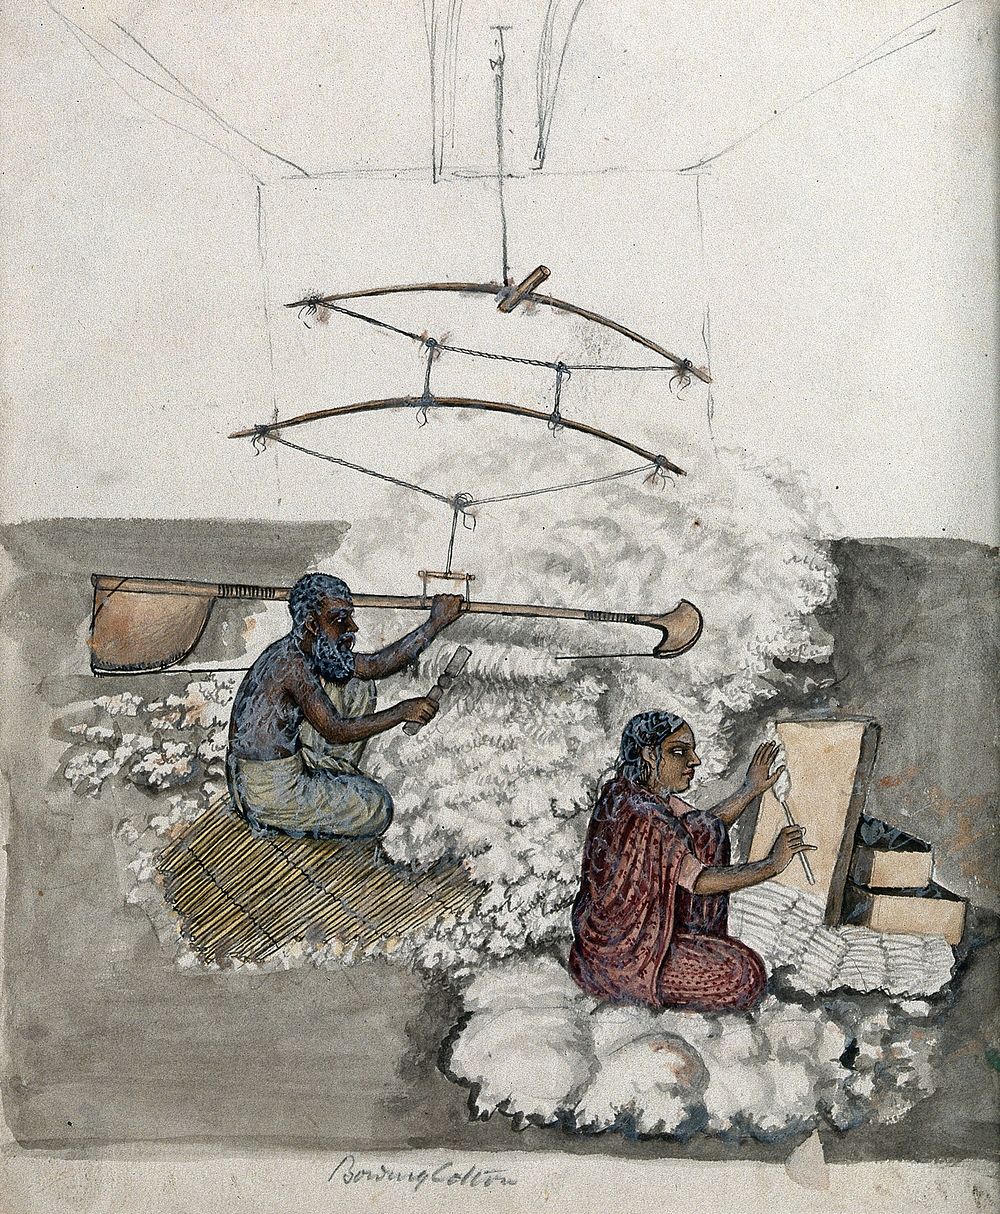 A man and a woman making cotton. Watercolour by an Indian artist.